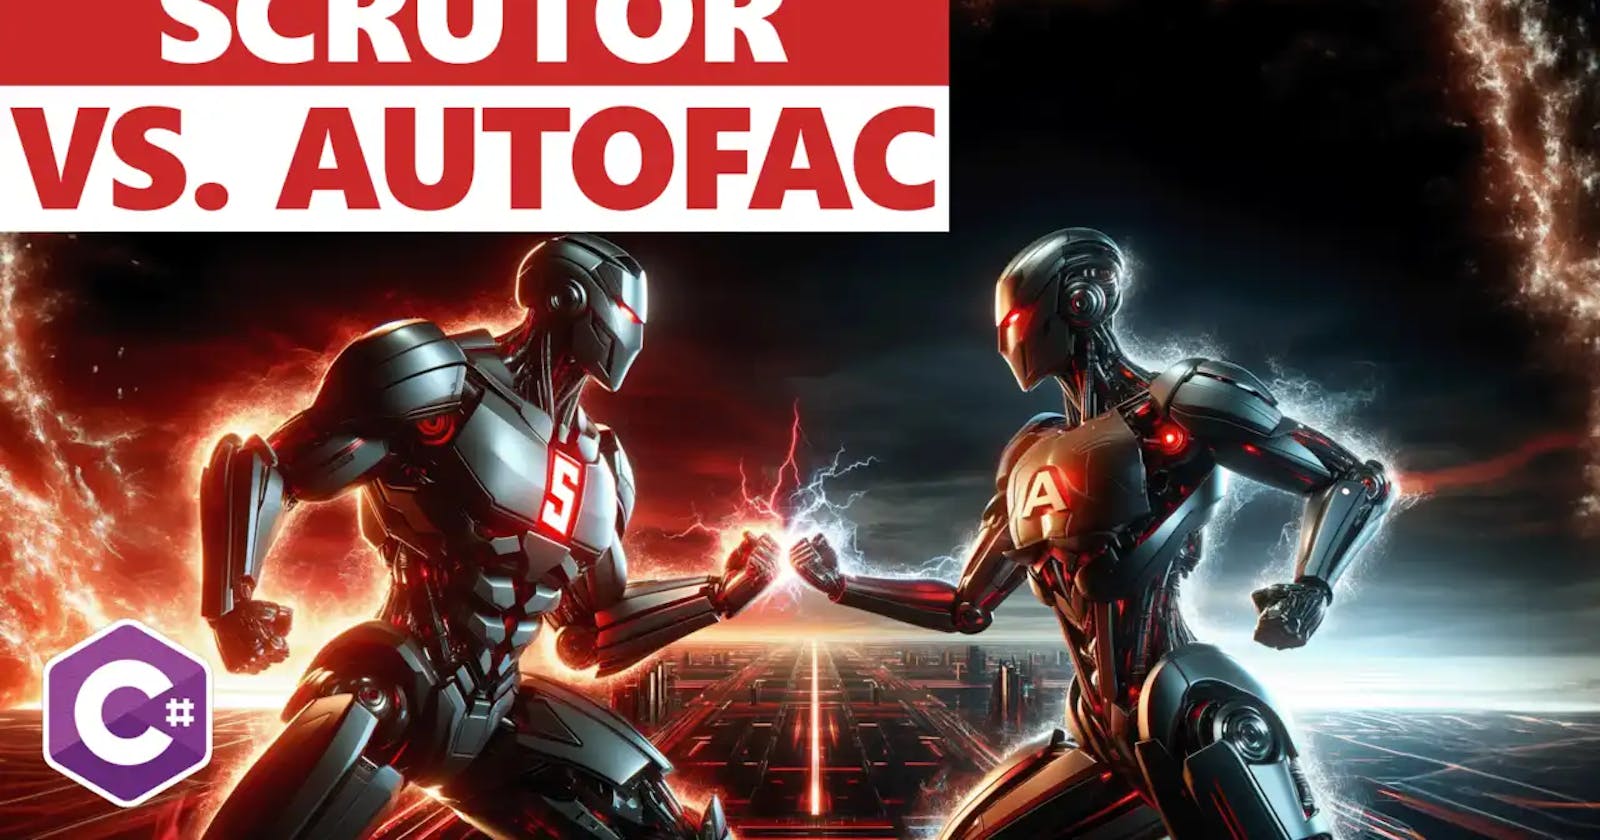 Scrutor vs Autofac in C#: What You Need To Know